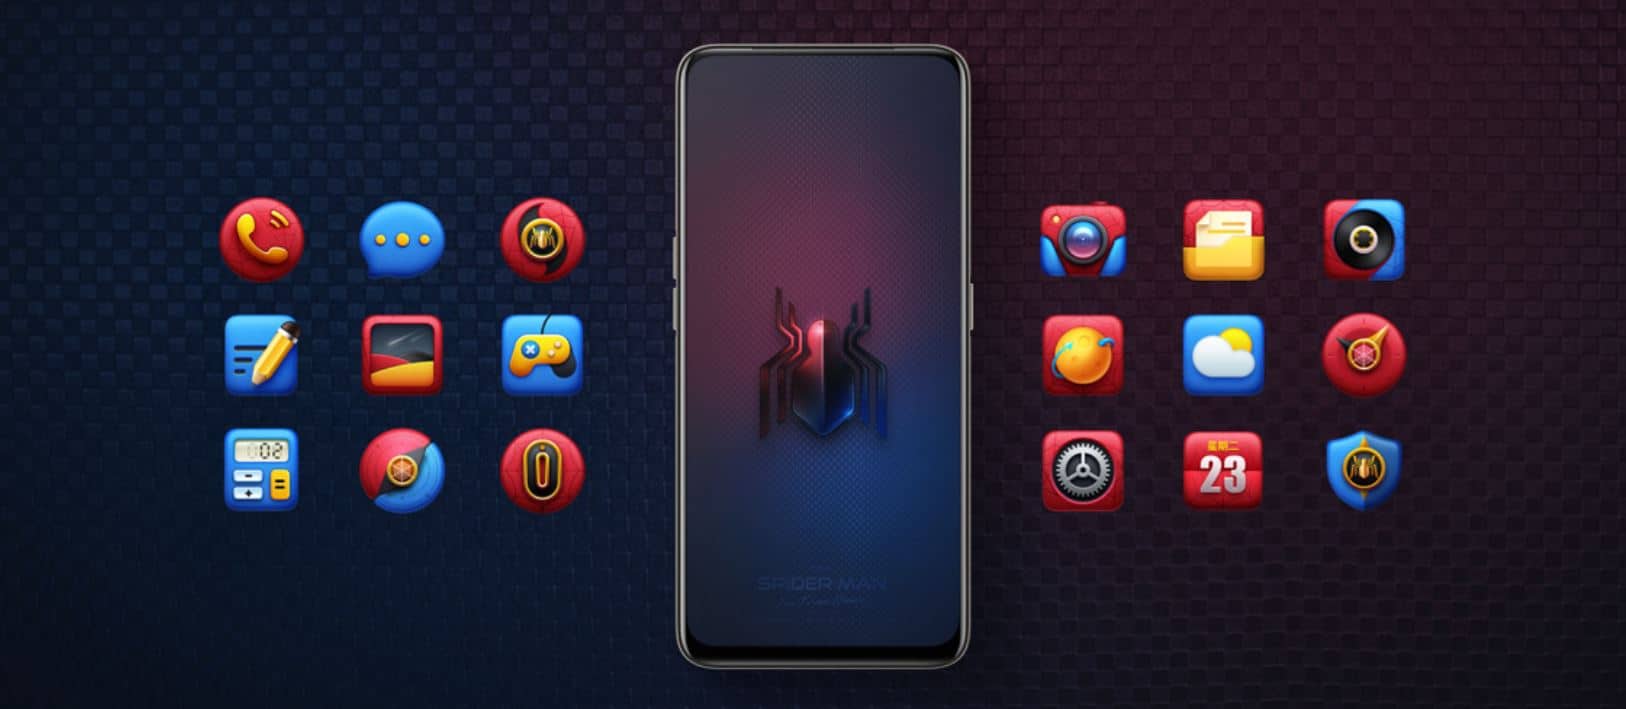 Realme X Spider-Man Edition will be launching soon - GadgetMatch